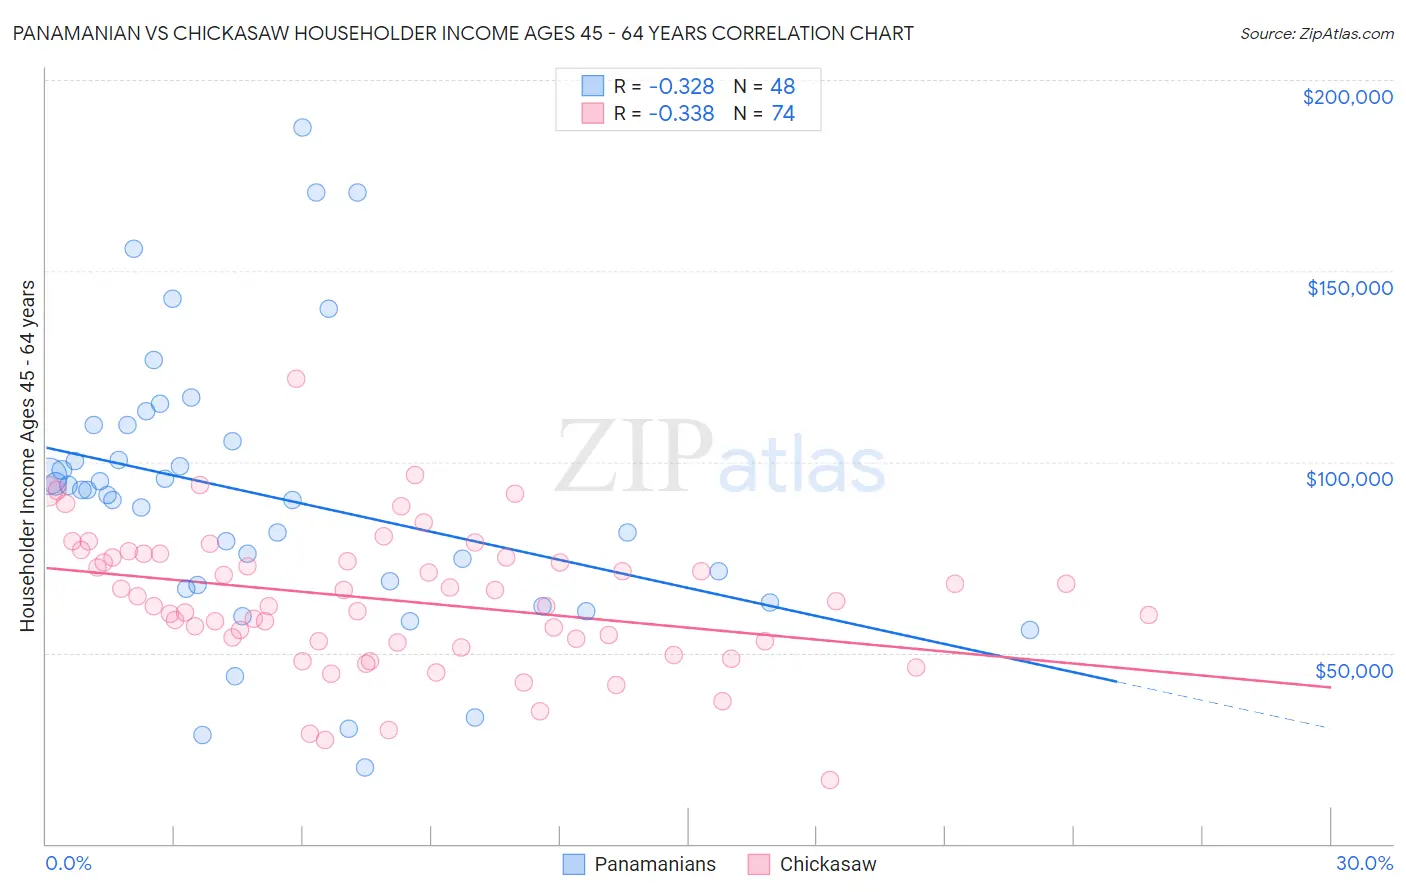 Panamanian vs Chickasaw Householder Income Ages 45 - 64 years